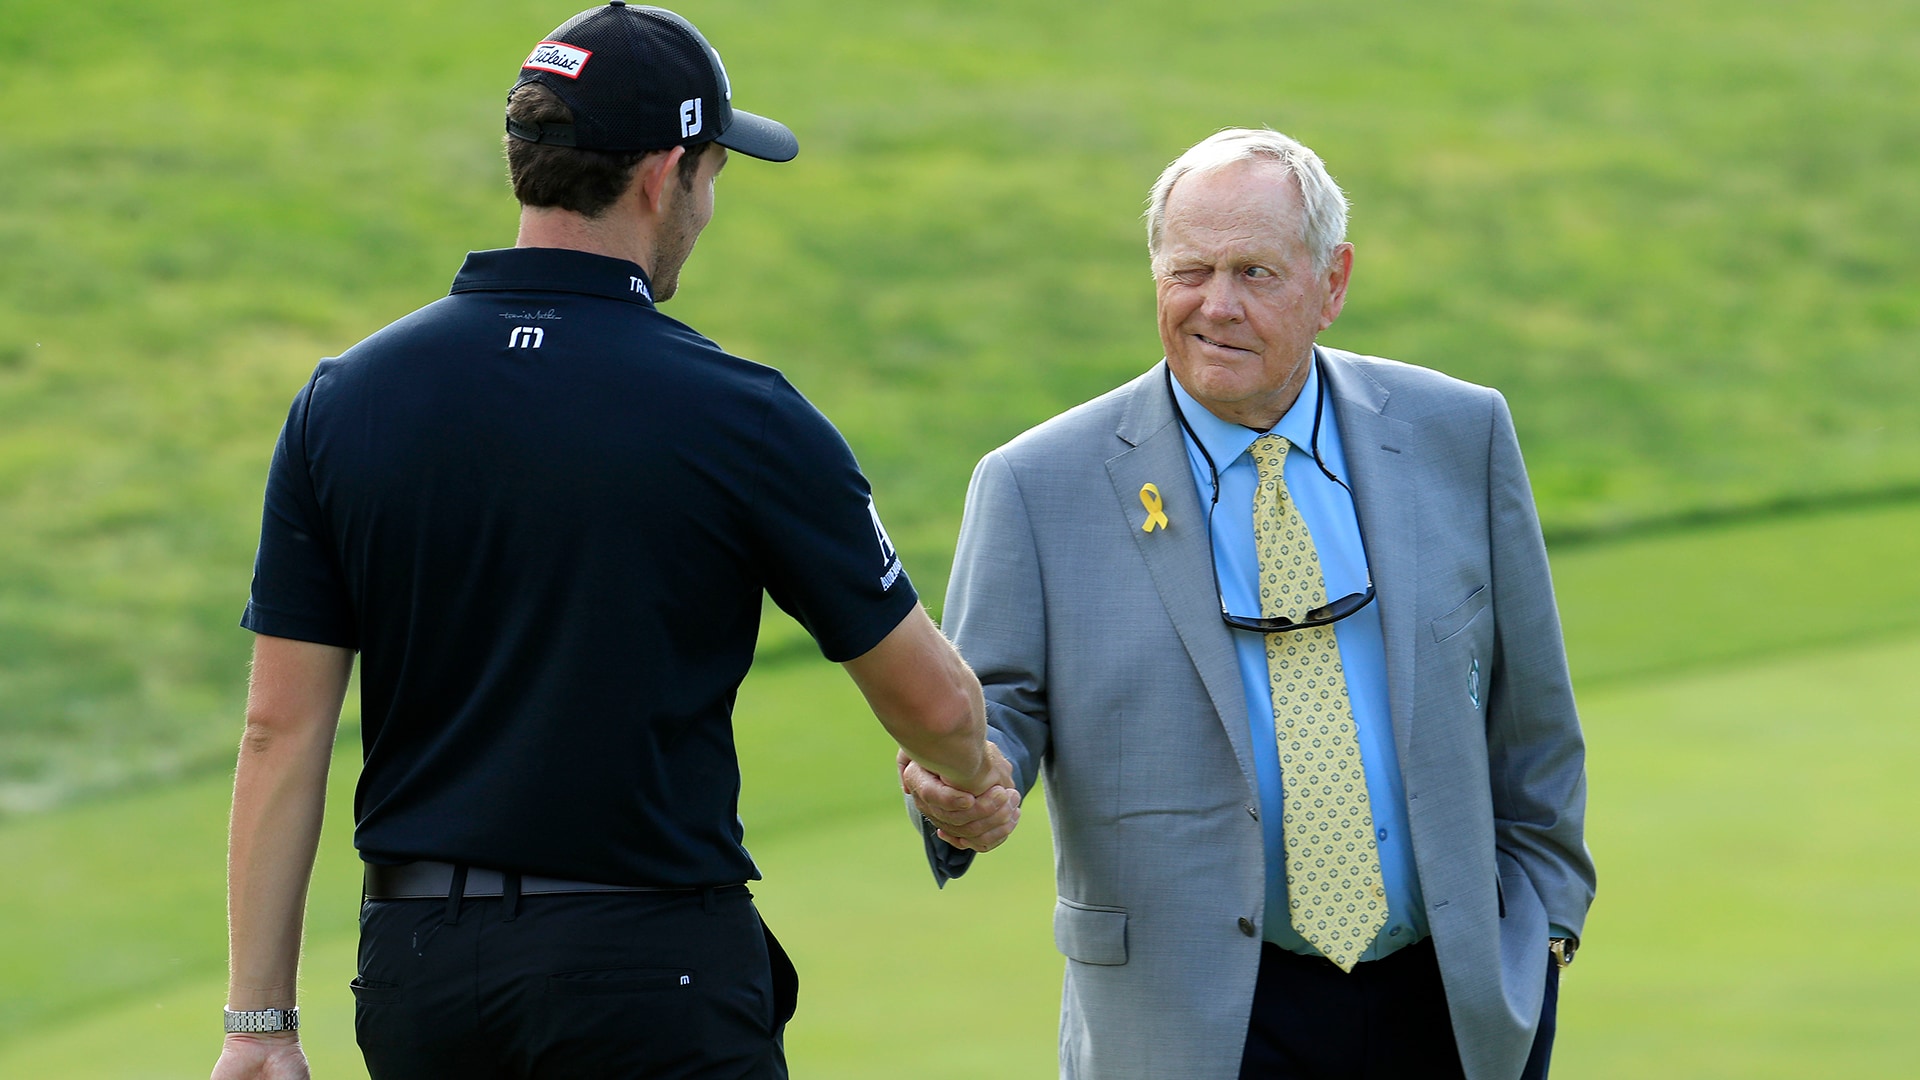 Tour’s COVID rules won’t stop Jack Nicklaus: ‘I’m going to shake [winner’s] hand’